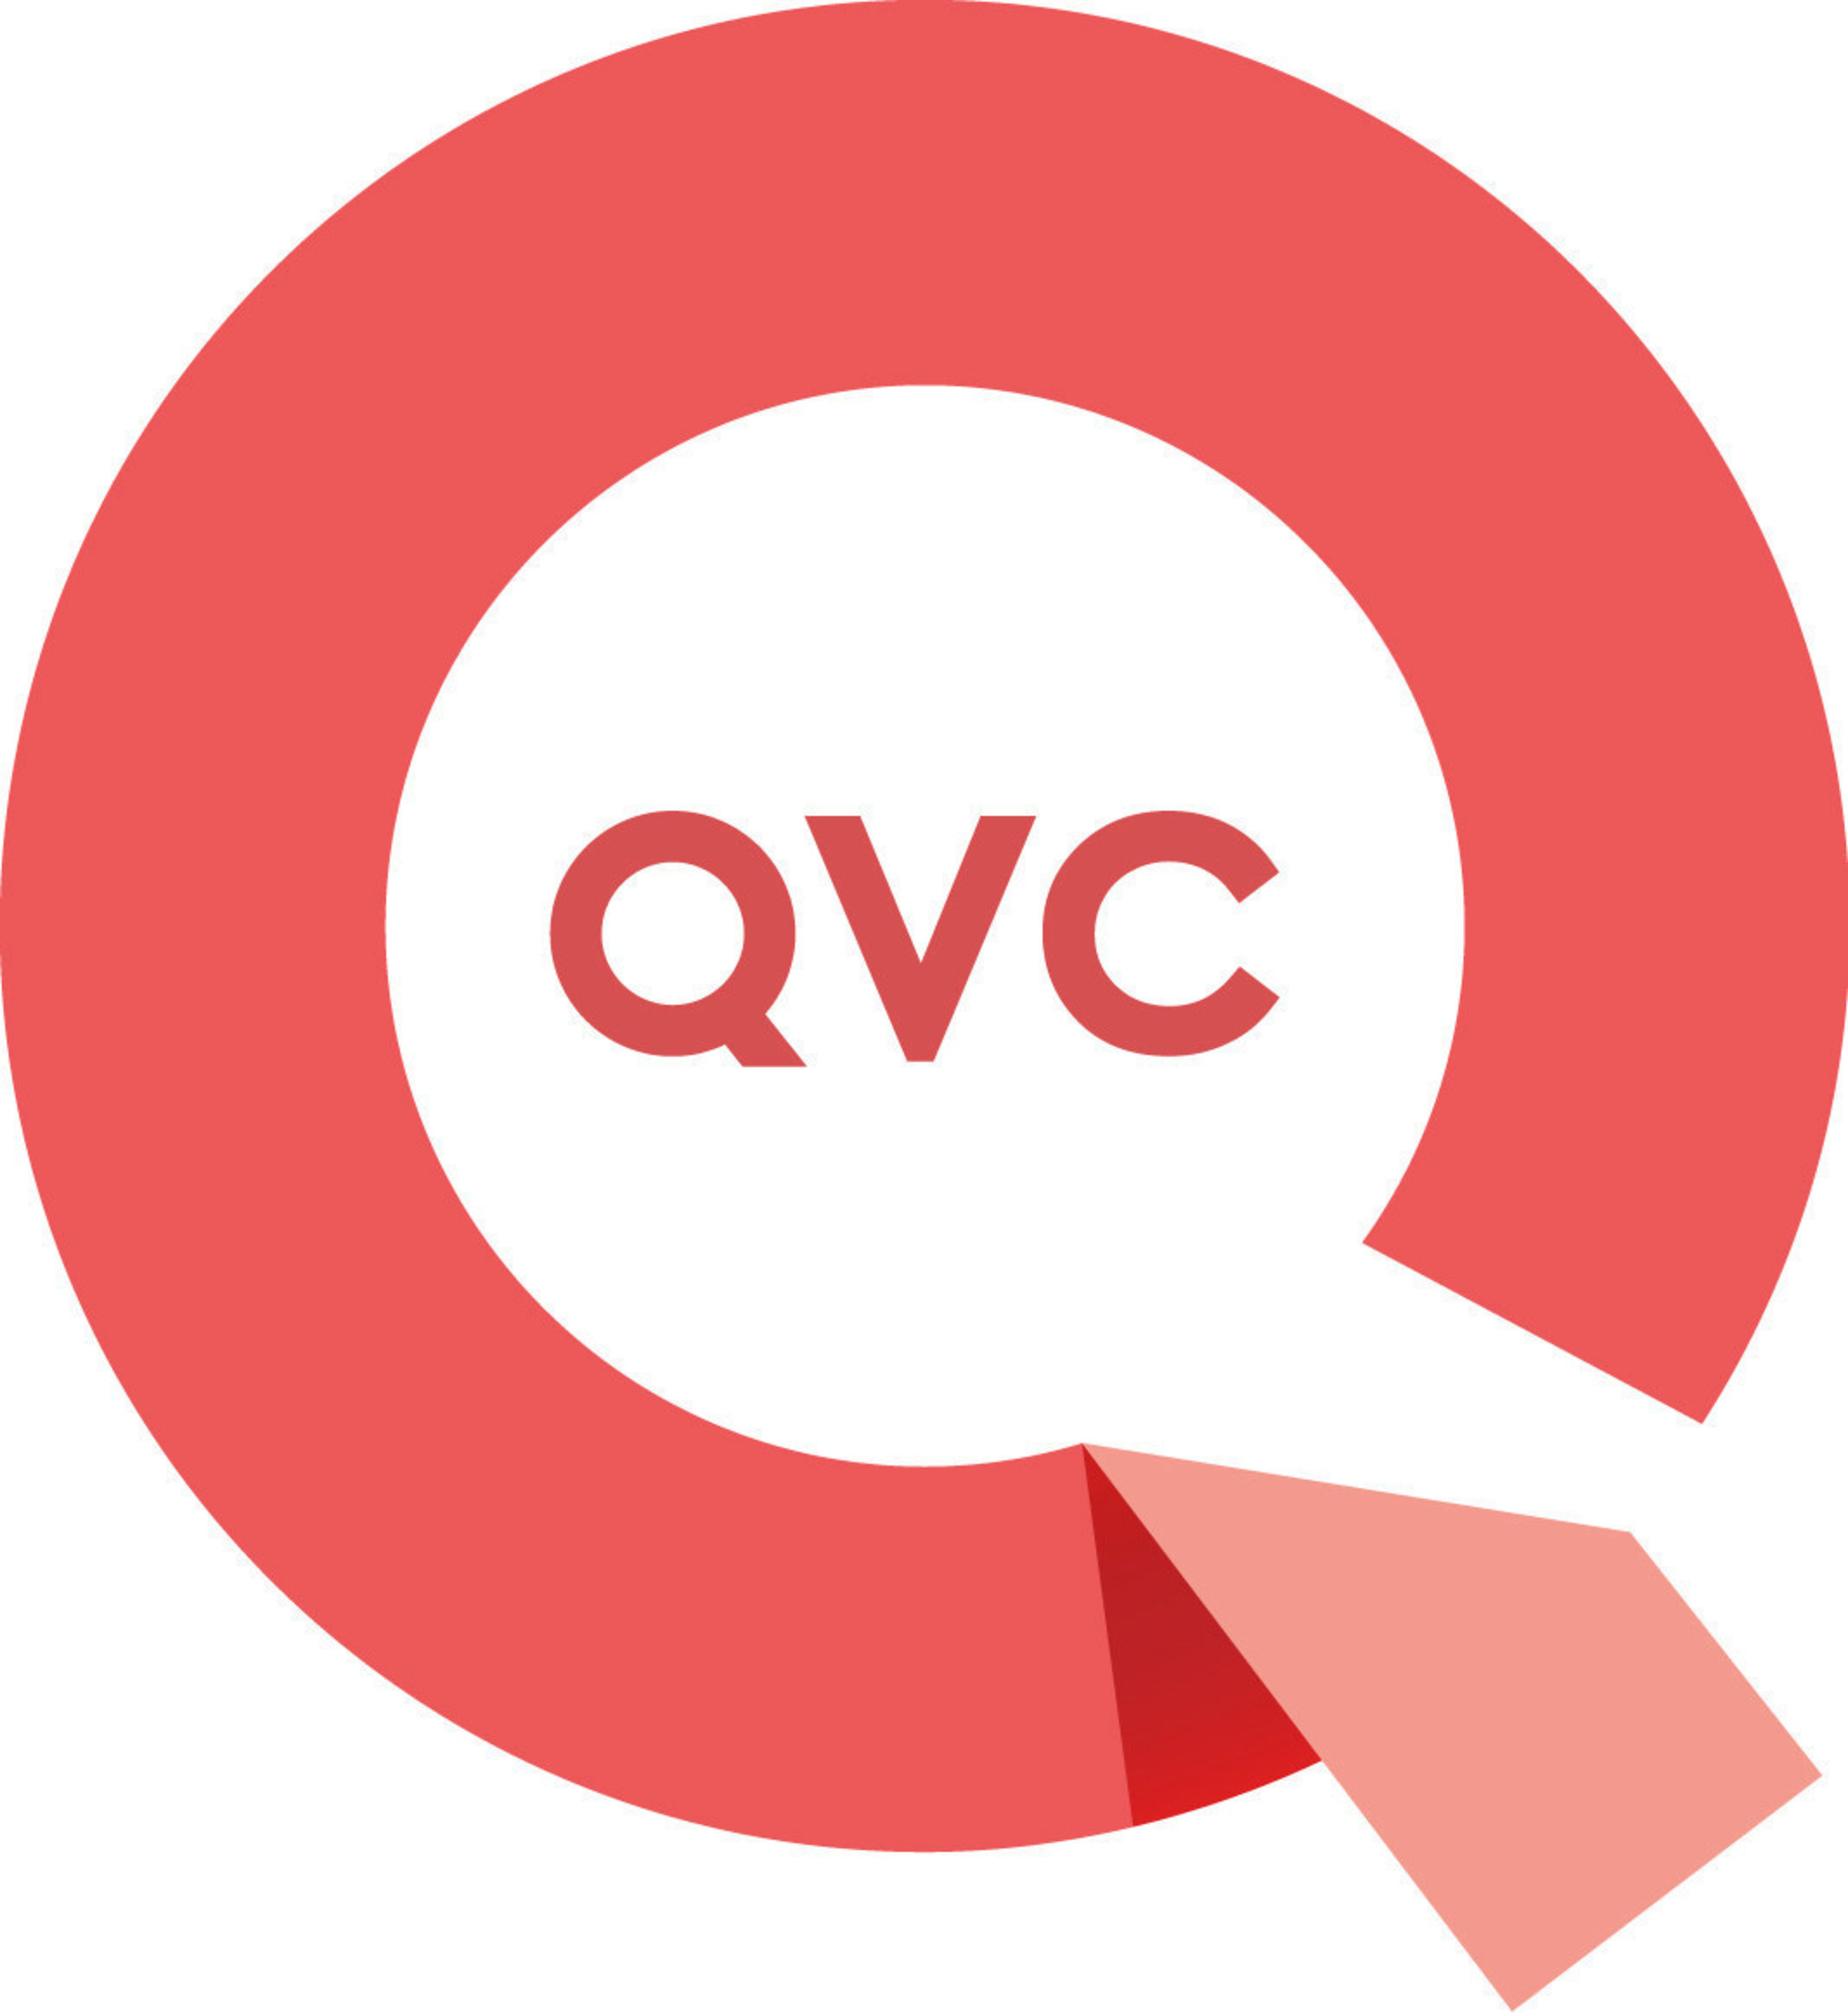 QVC, Inc. is the world's leading video and ecommerce retailer, committed to providing its customers with thousands of the most innovative and contemporary beauty, fashion, jewelry and home products.